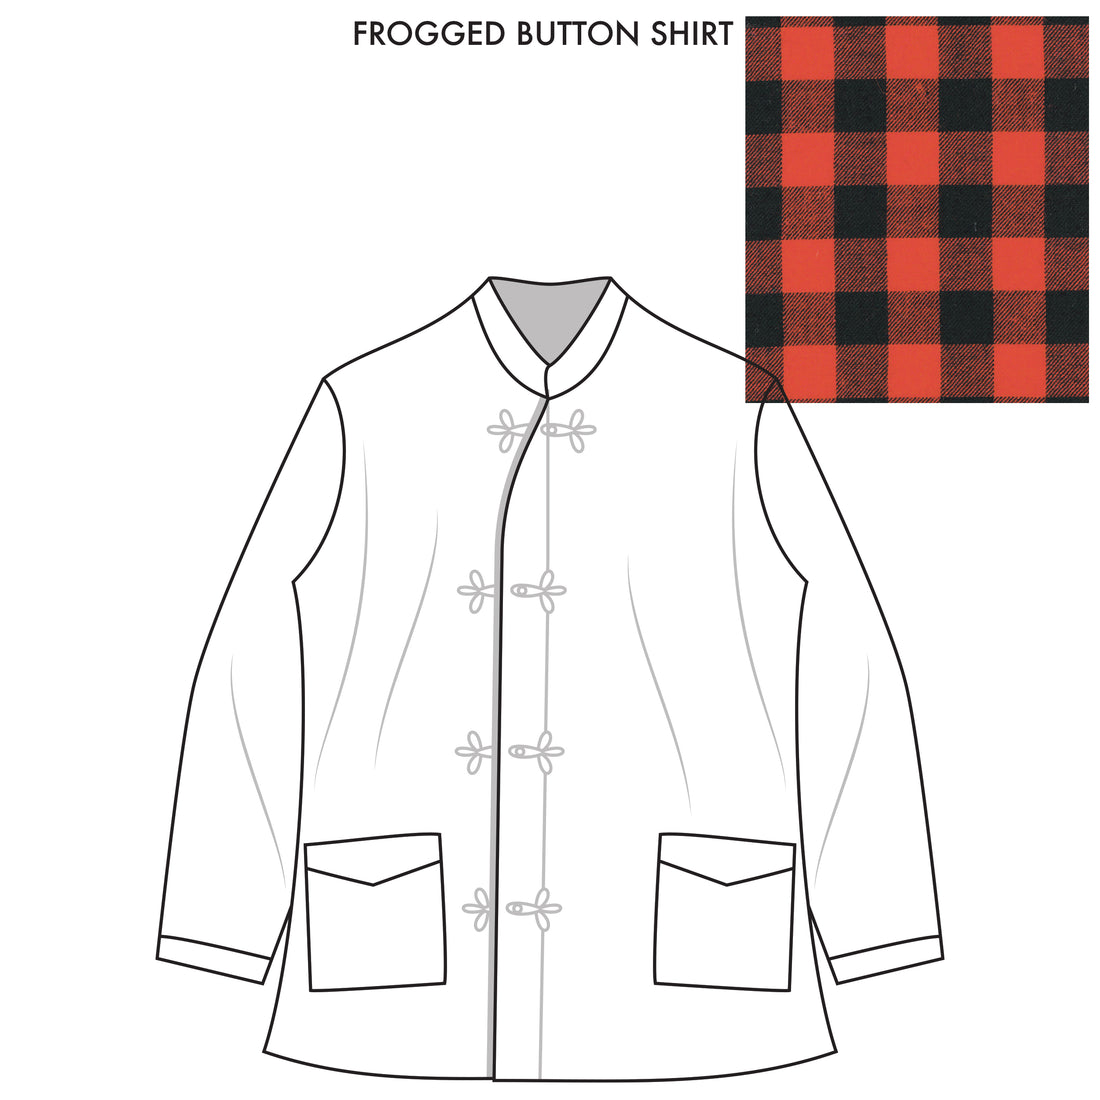 Bryceland’s Frogged Button Shirt Made-to-order Red Check